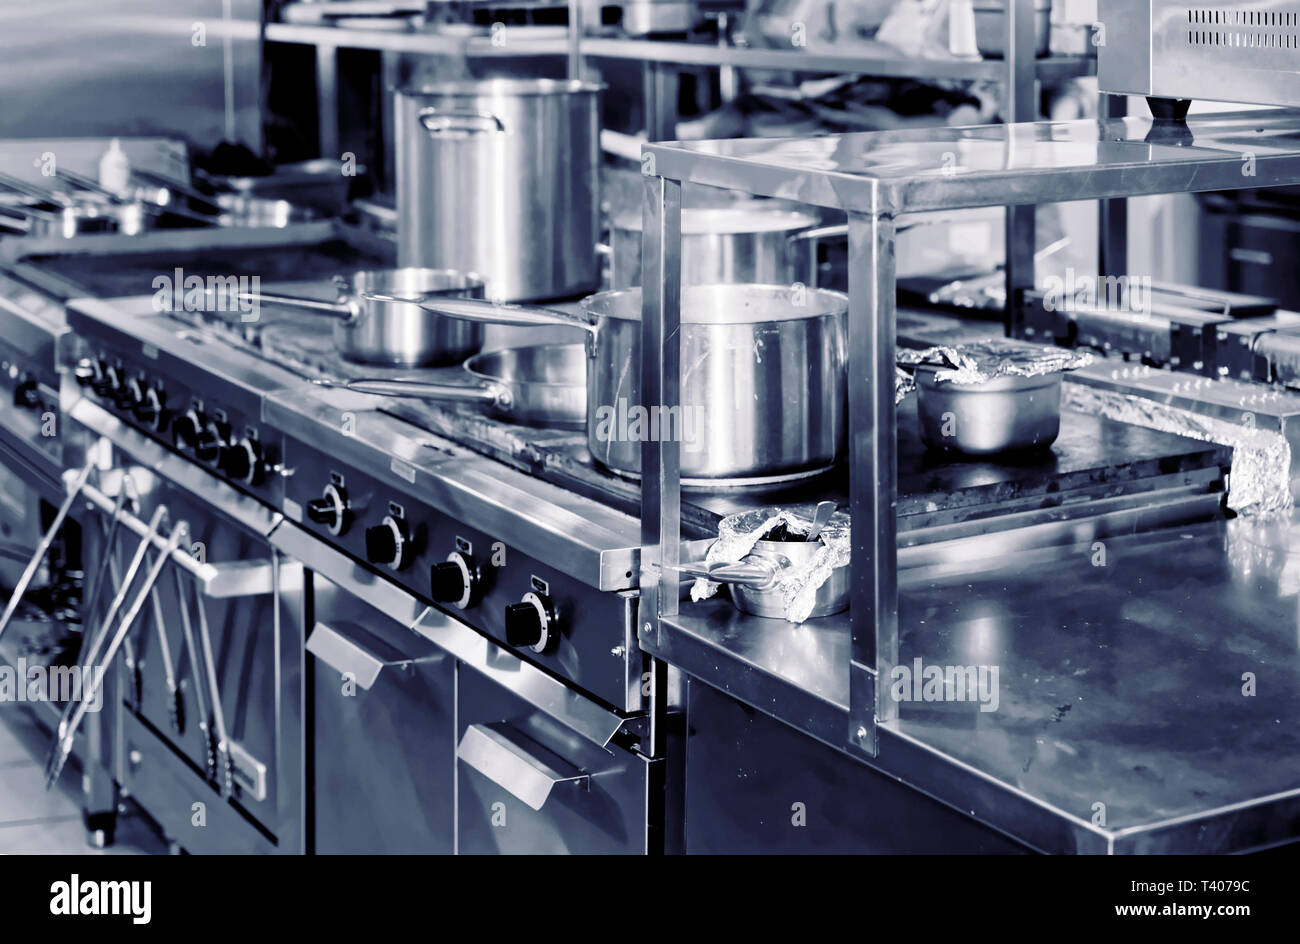 Typical kitchen of a restaurant Stock Photo